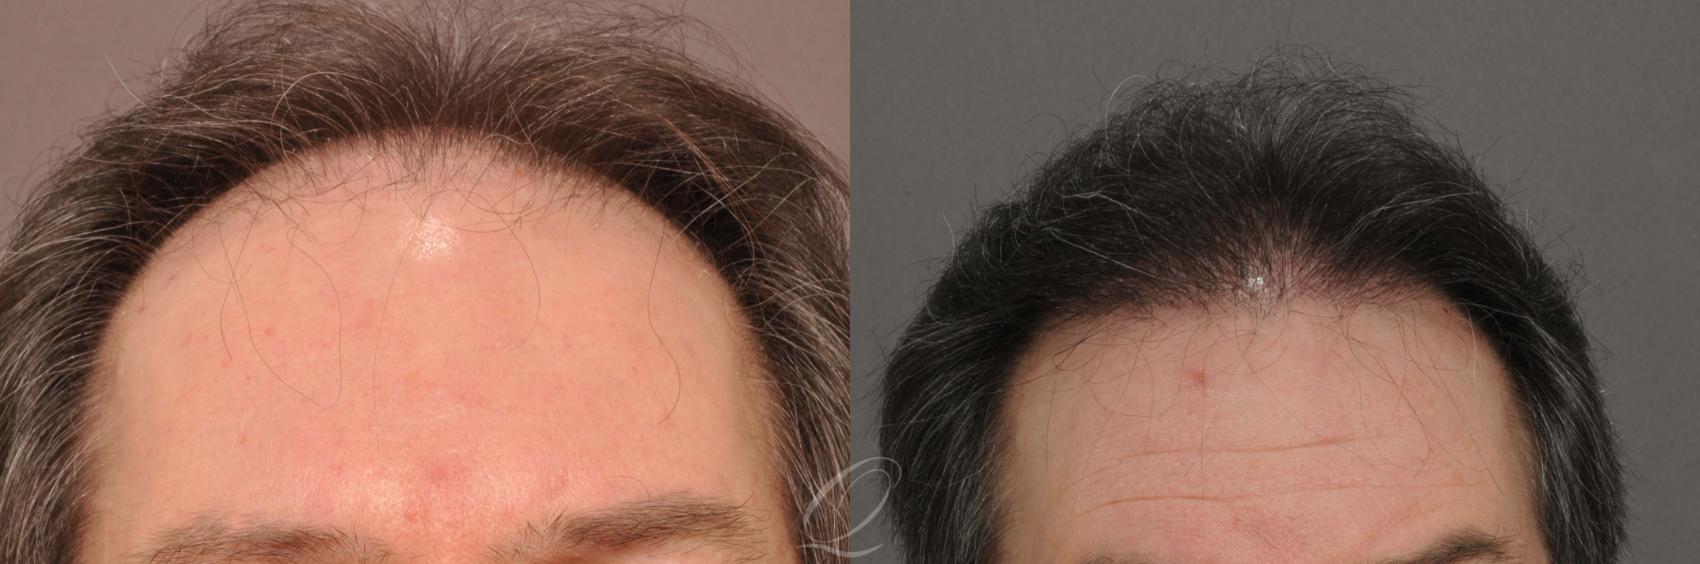 FUT Case 1018 Before & After View #1 | Rochester, NY | Quatela Center for Hair Restoration